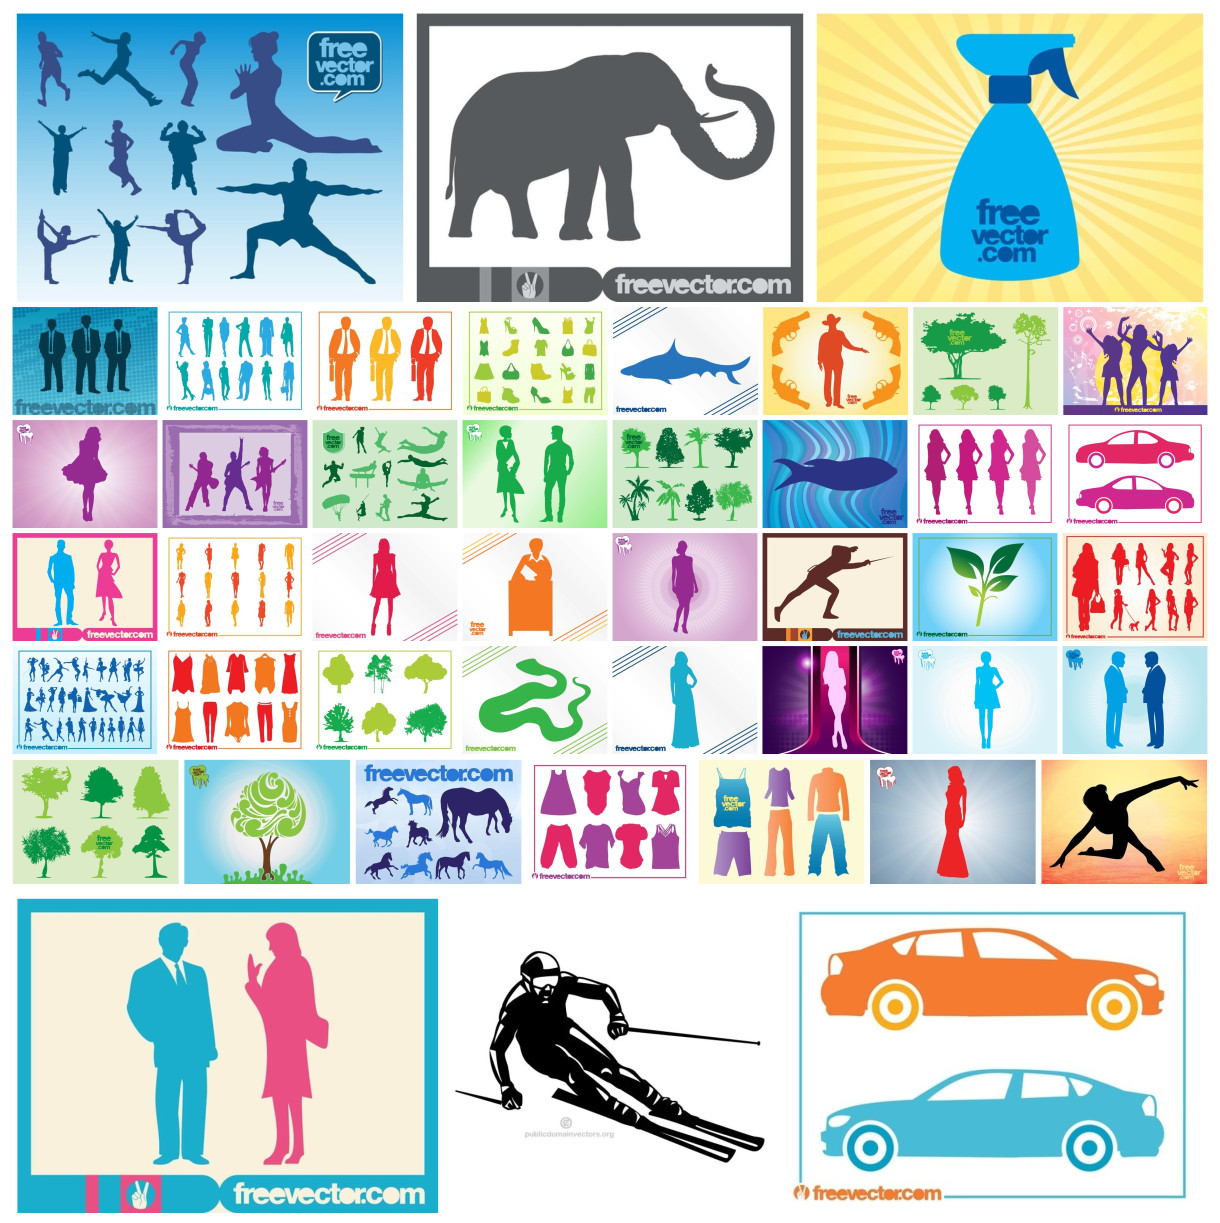 Explore Silhouette Vector: An Exquisite Collection of Over 40 Unique Designs